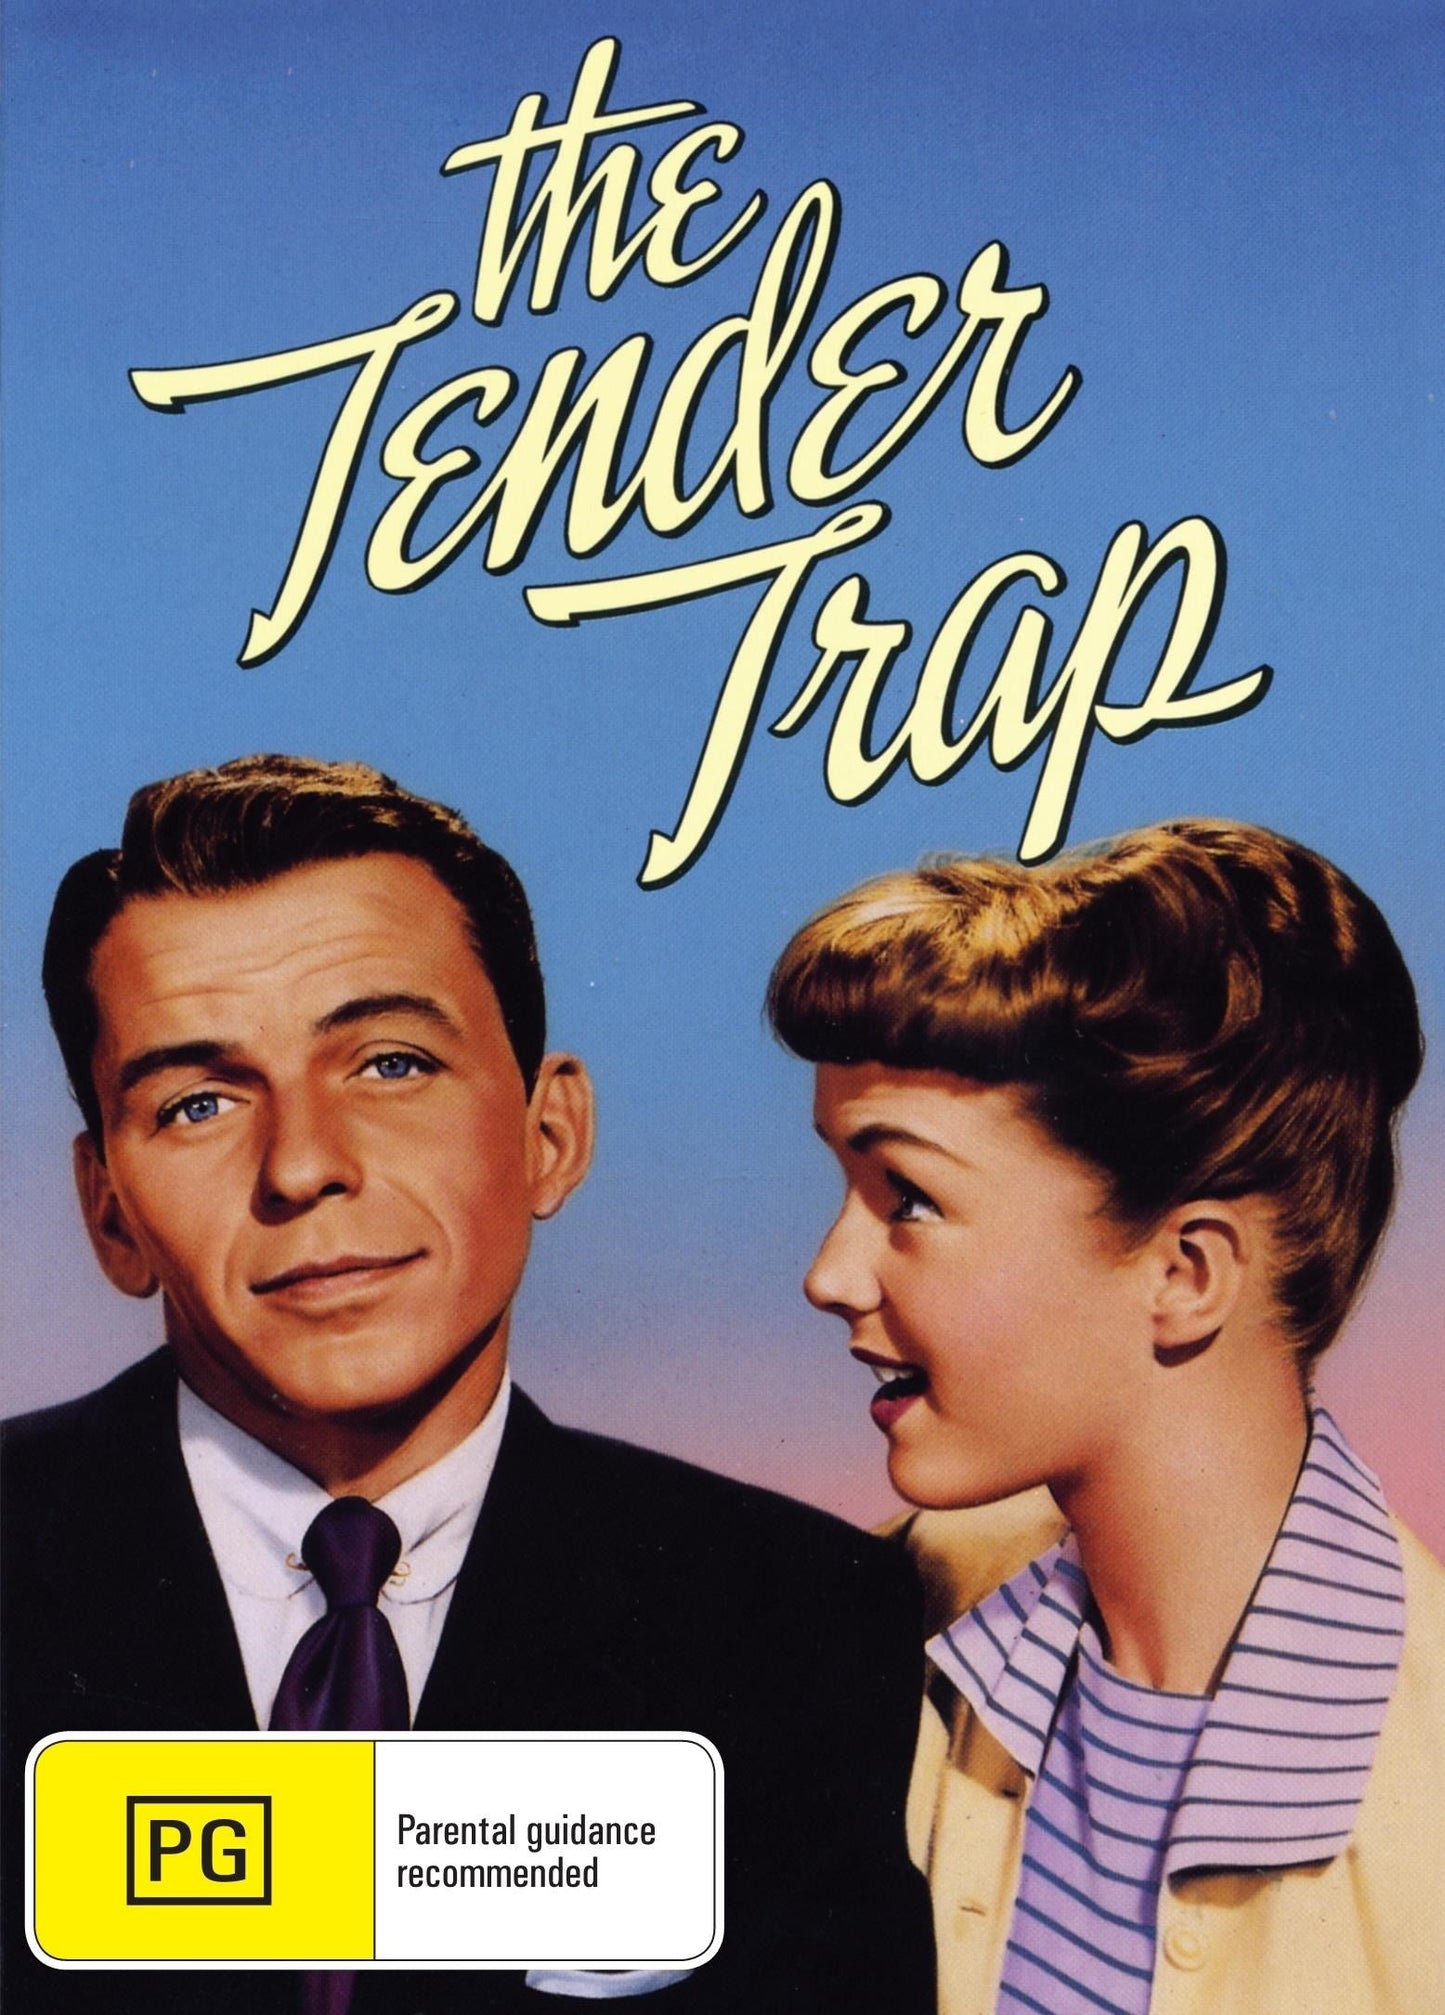 The Tender Trap rareandcollectibledvds